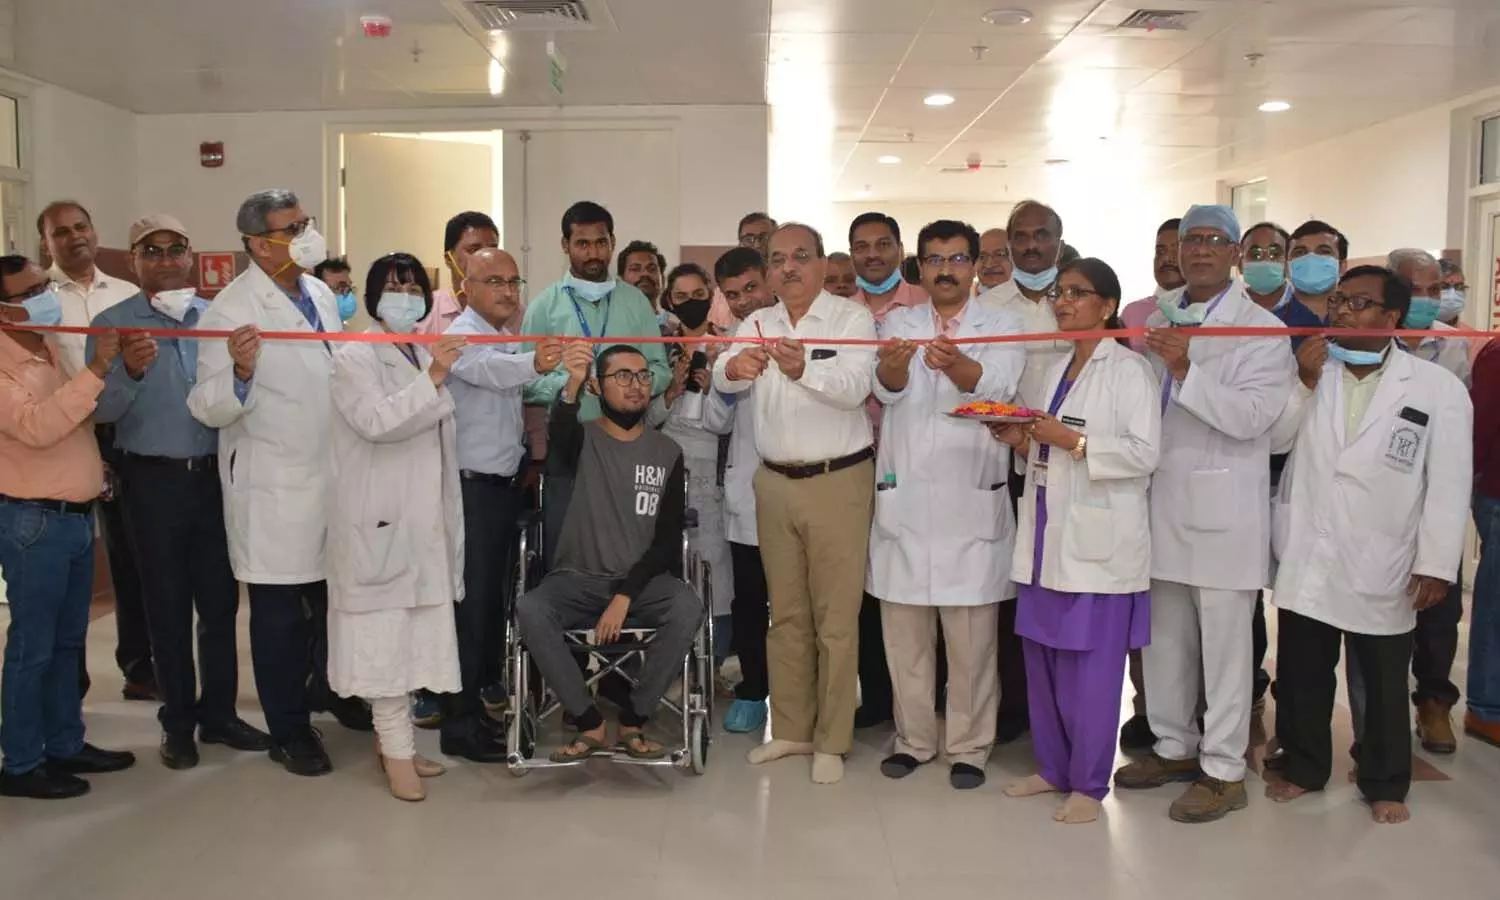 EMRTC starts with recruitment at Renal Transplant Center at SGPGI Lucknow